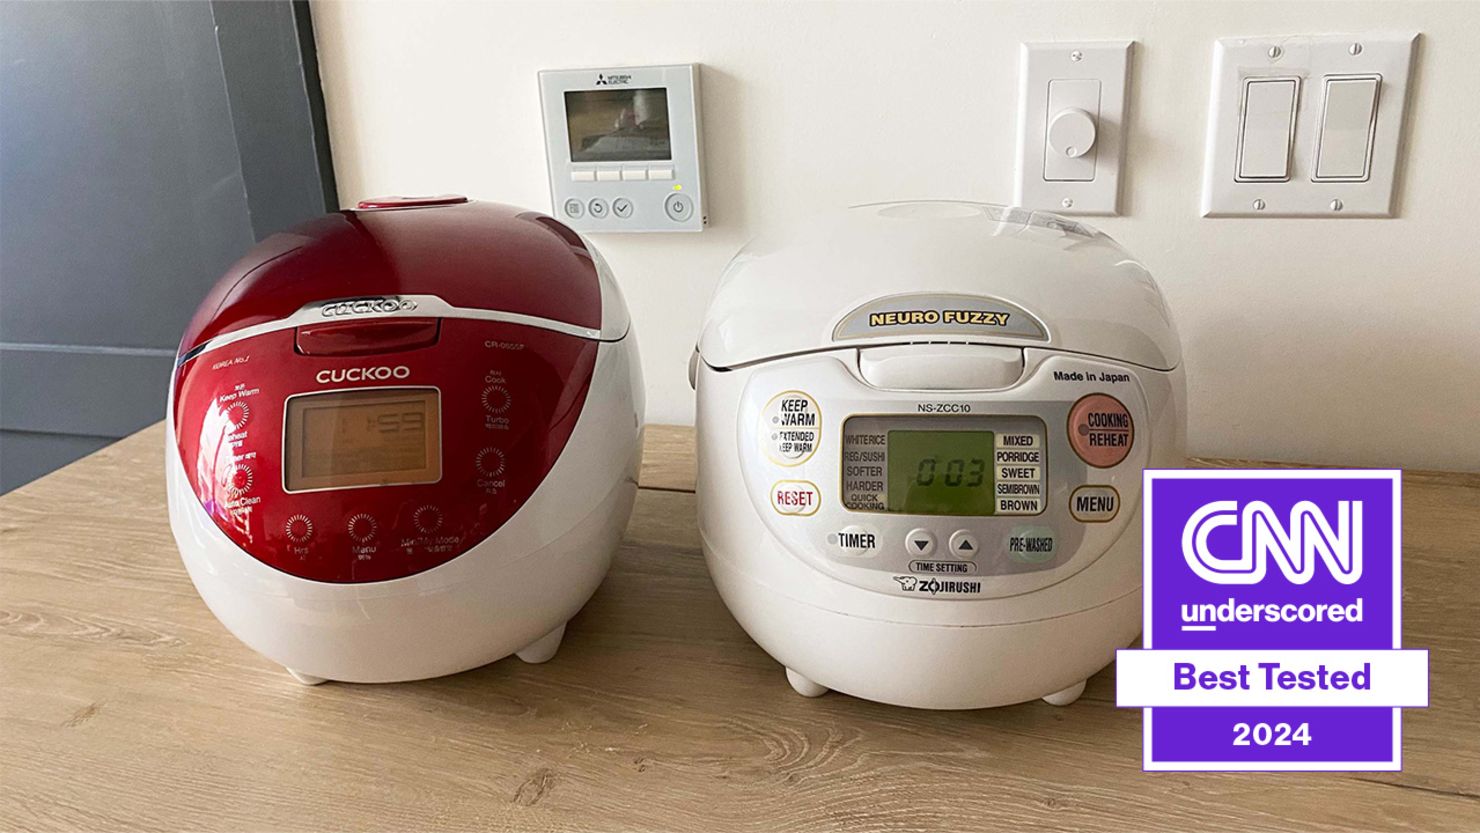 Zojirushi Induction Rice Cooker: The Best New Rice Cooker for Consistently  Perfect Rice